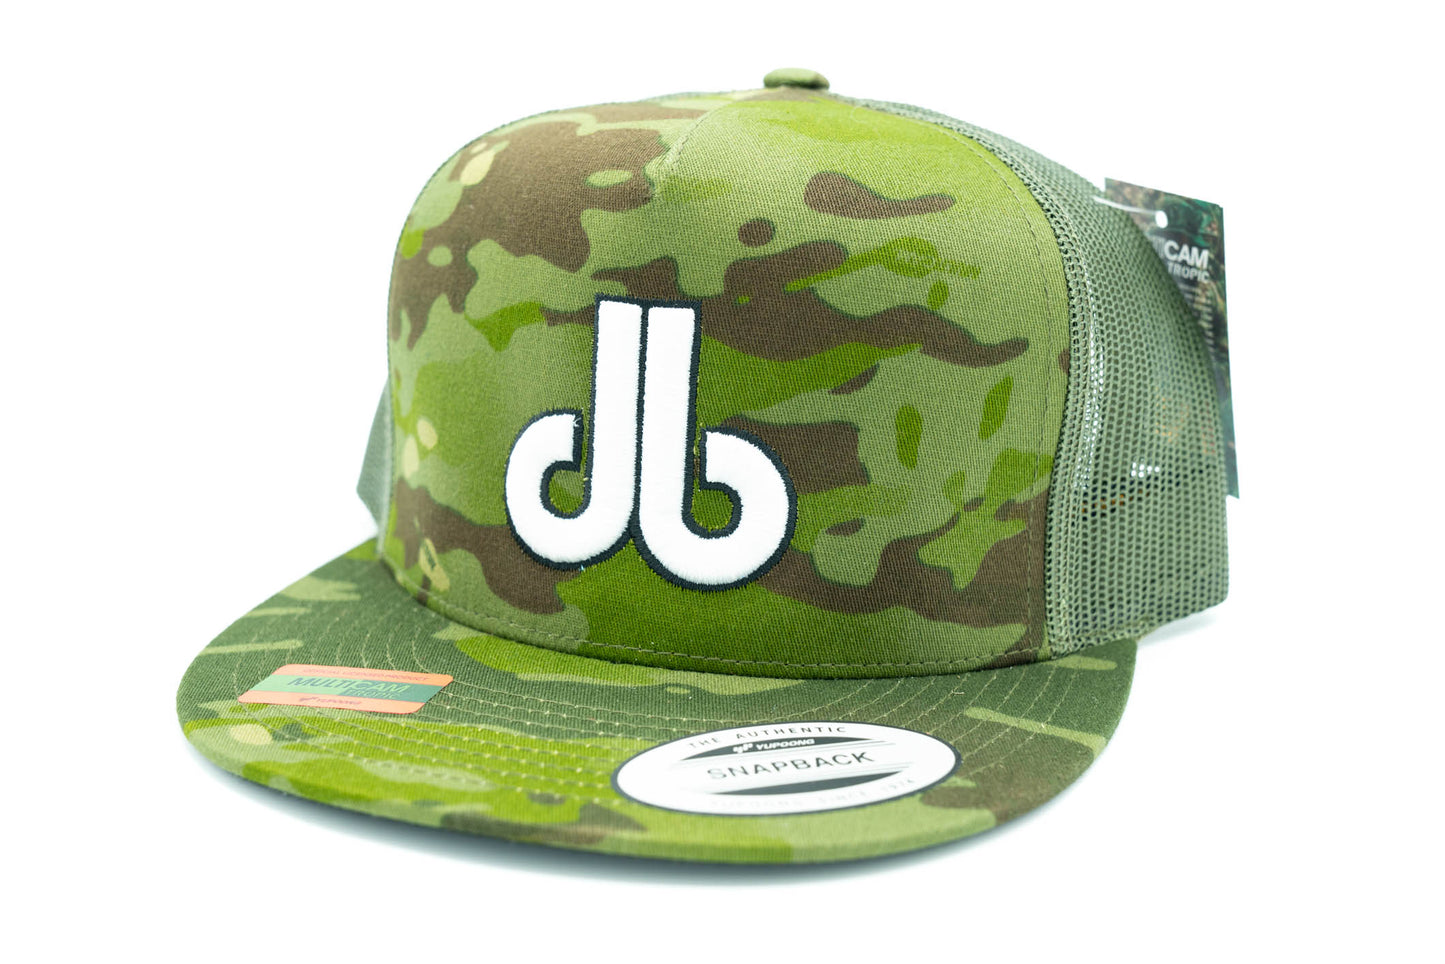 db Cornhole - Green Camouflage Hat with White db